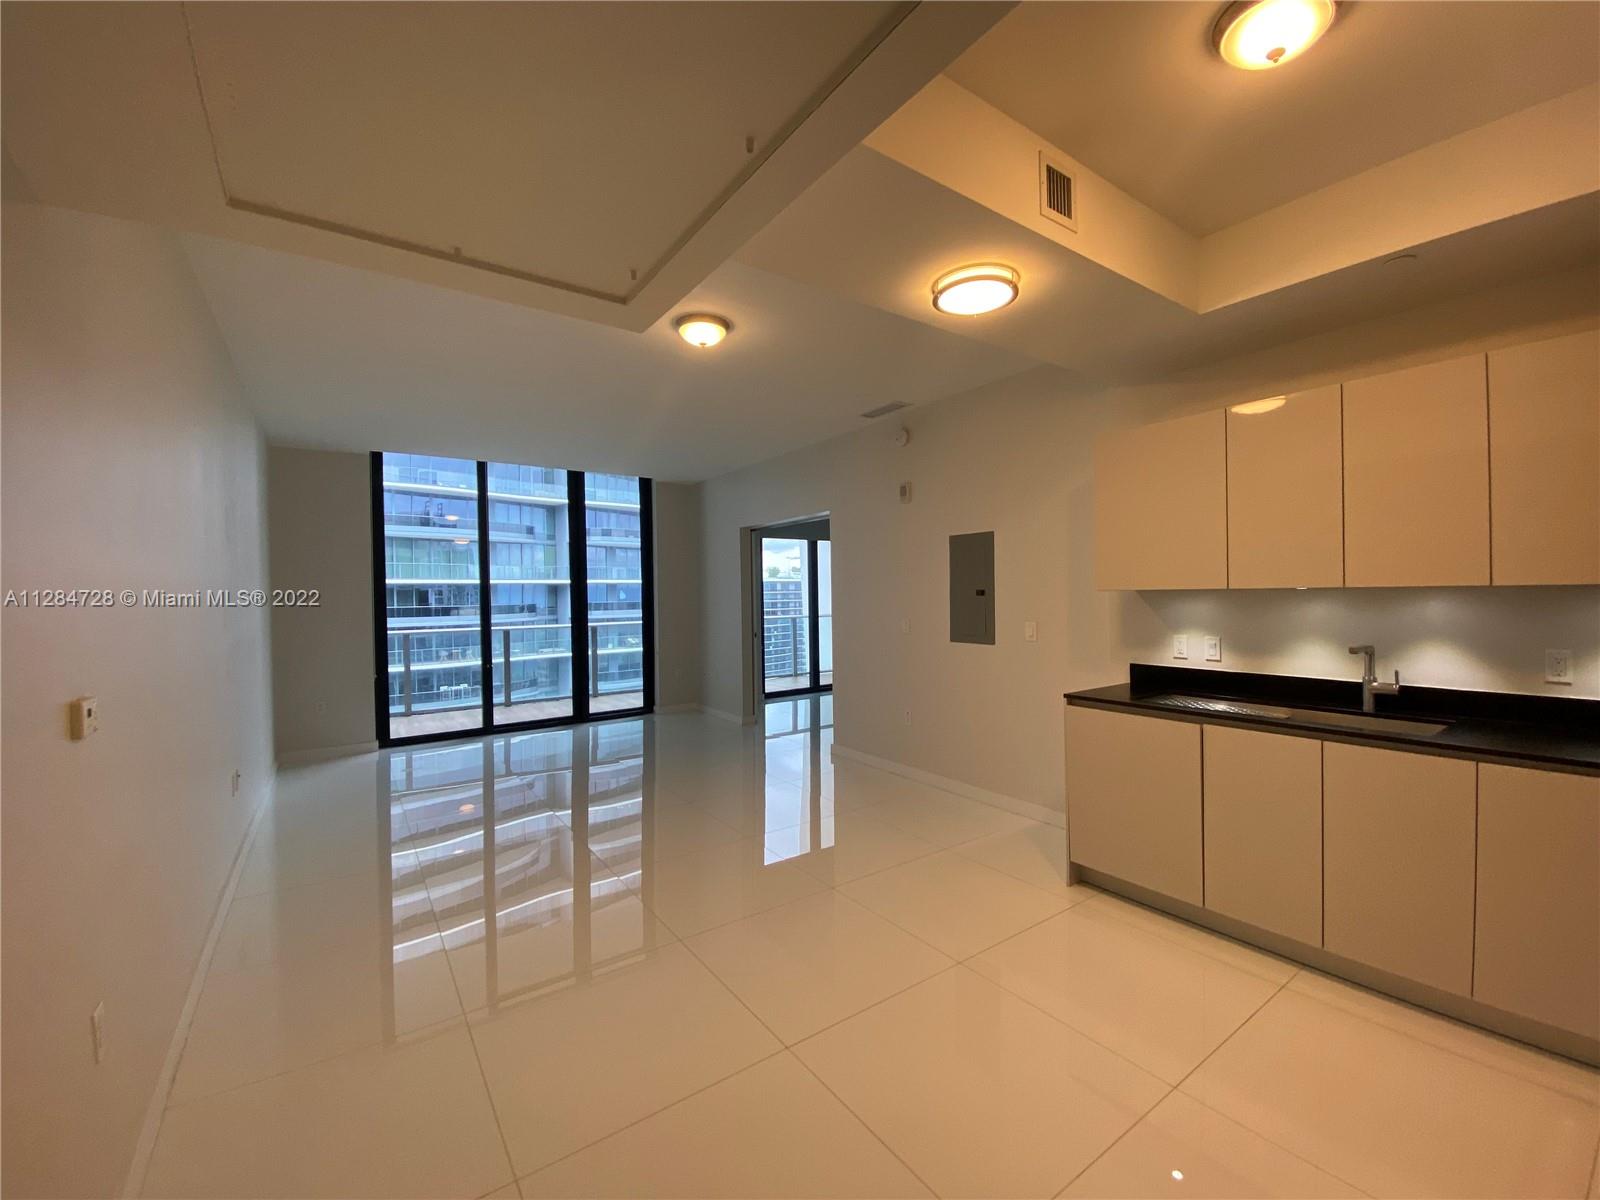 Great lay out with kitchen sharing with open space on living and dining room. Apartment is ready for you to move and enjoy the confort of being in the heart of Brickell where everything is walking distance. The unit has 1 bedroom & 1 bathroom. 1010 Brickell has a family friendly & unique playground, outdoor cinema, gym, squash court, basketball court, roof top and indoor pool, party room, game room with two bowling lines and more..